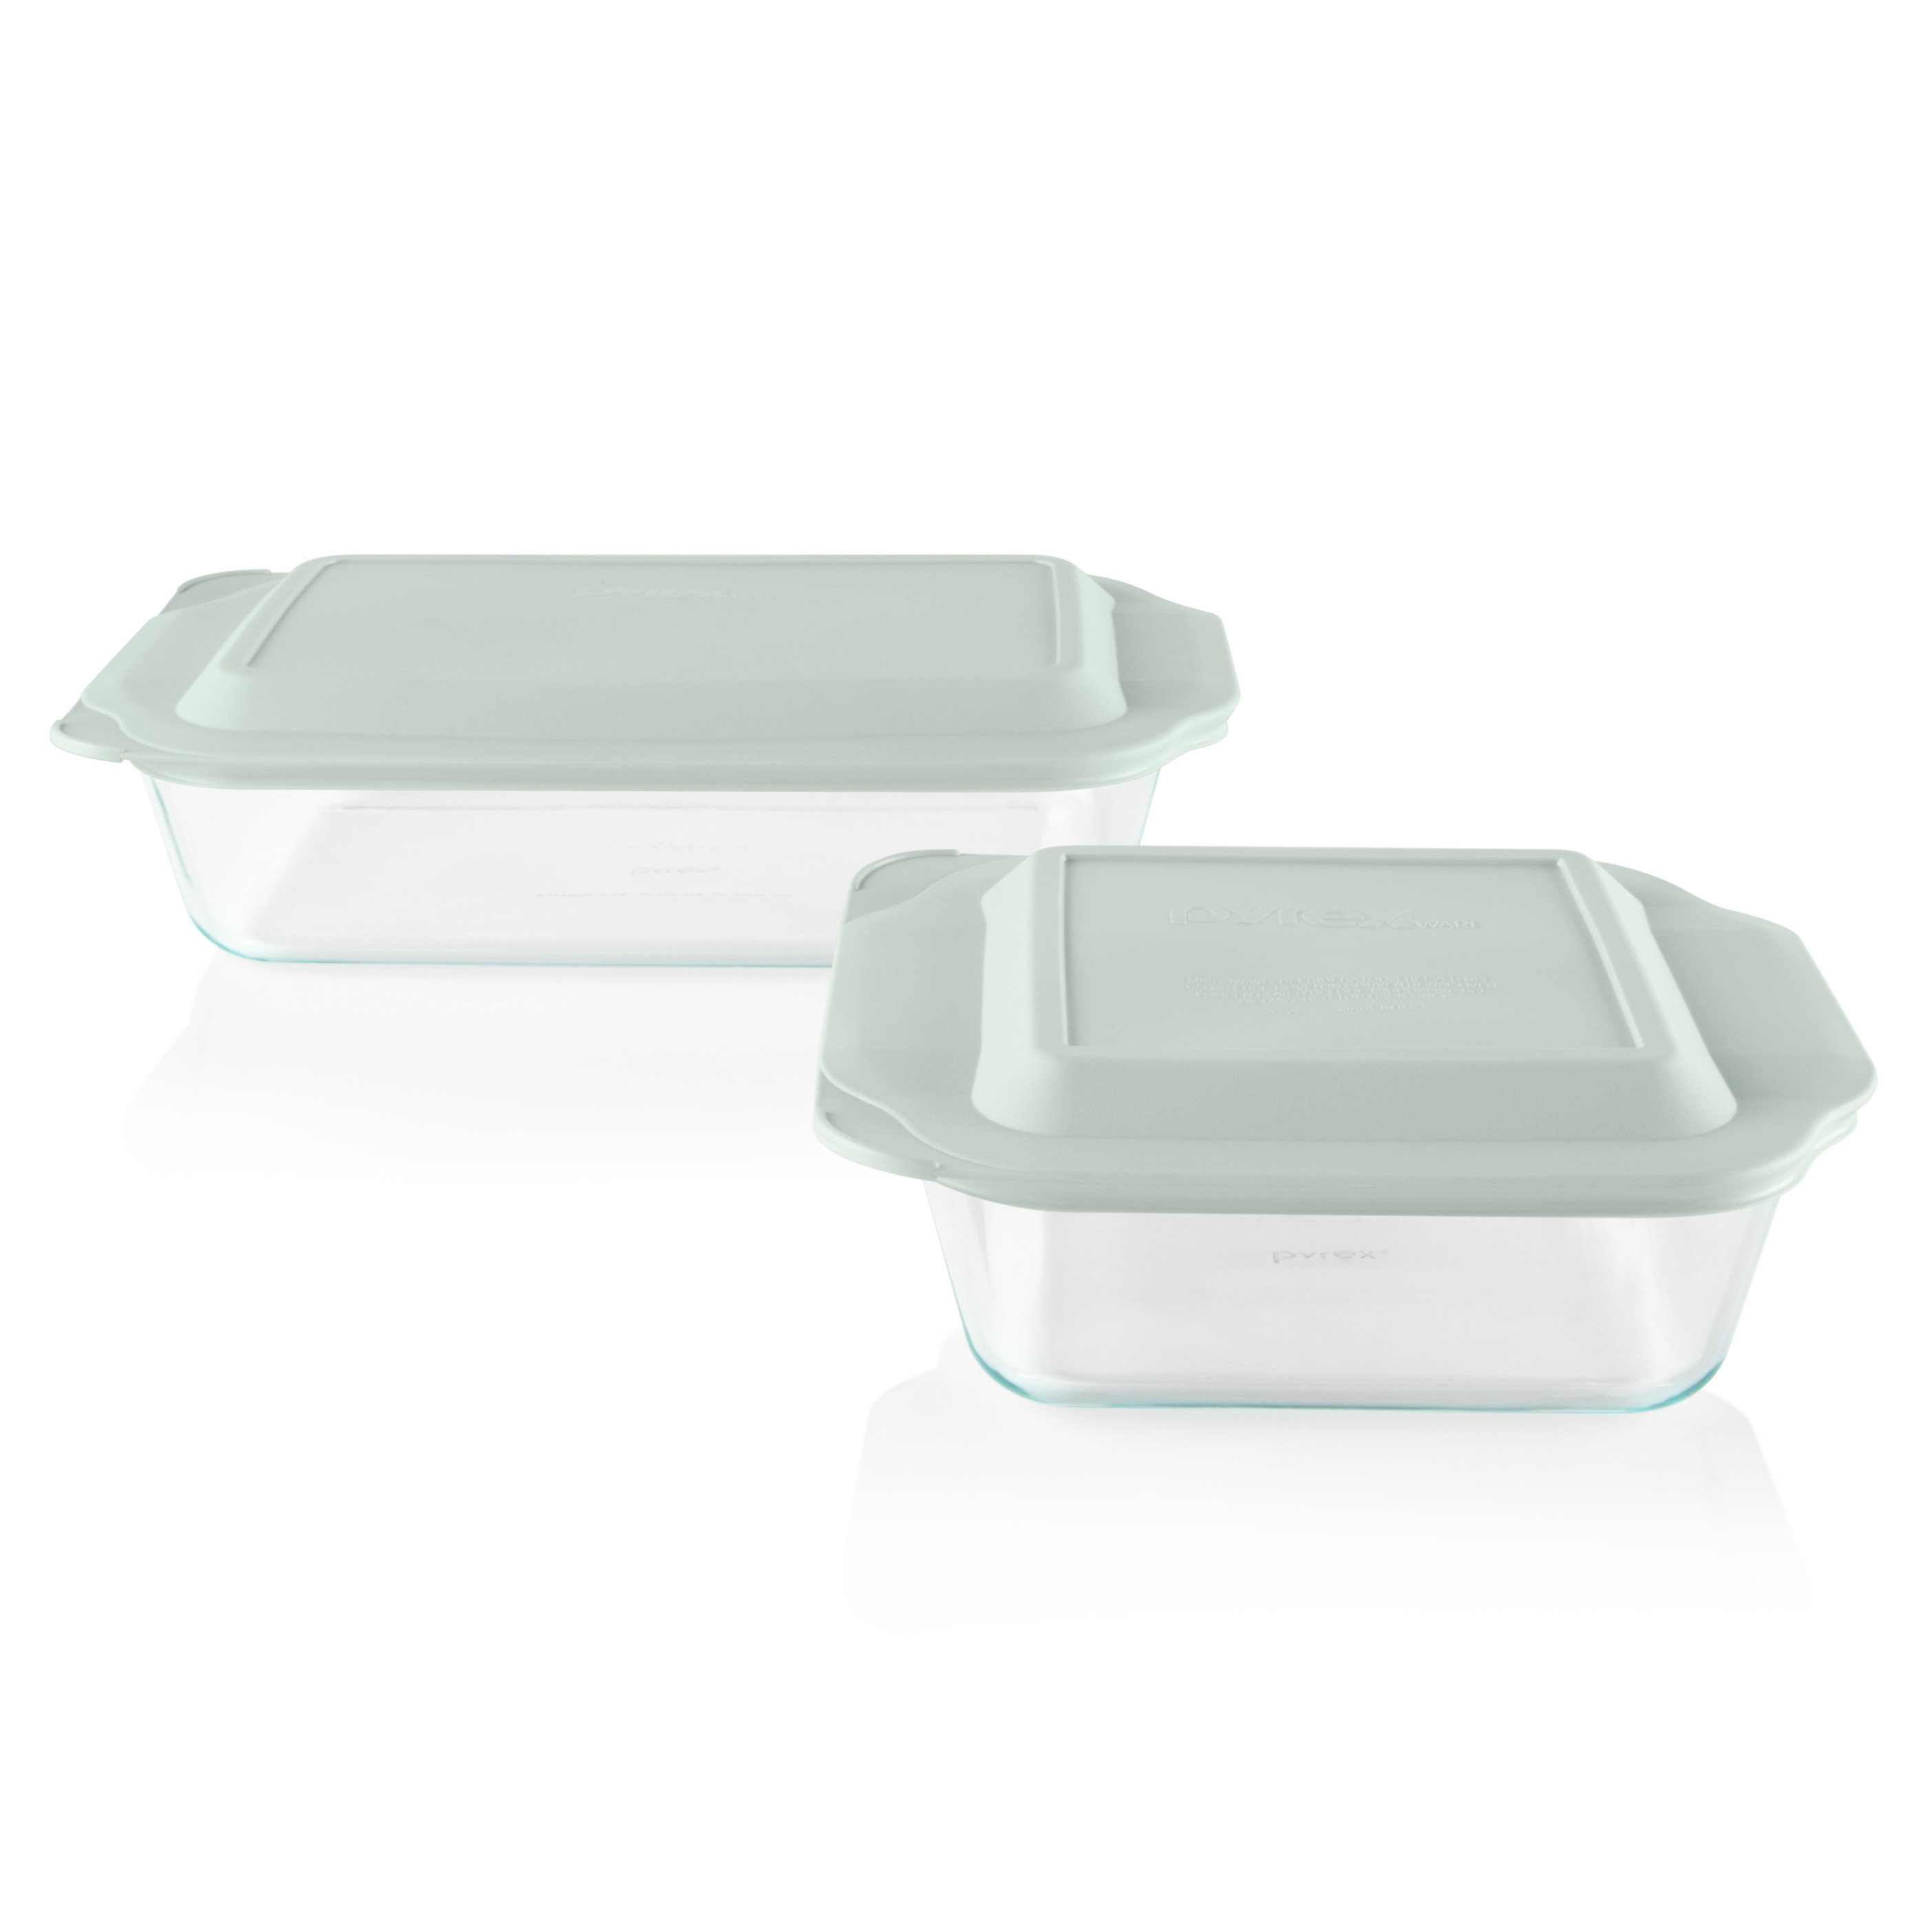 Rubbermaid Glass Baking Dishes for Oven, Casserole Dish Bakeware, DuraLite  3-Piece Set, White (No Lids)